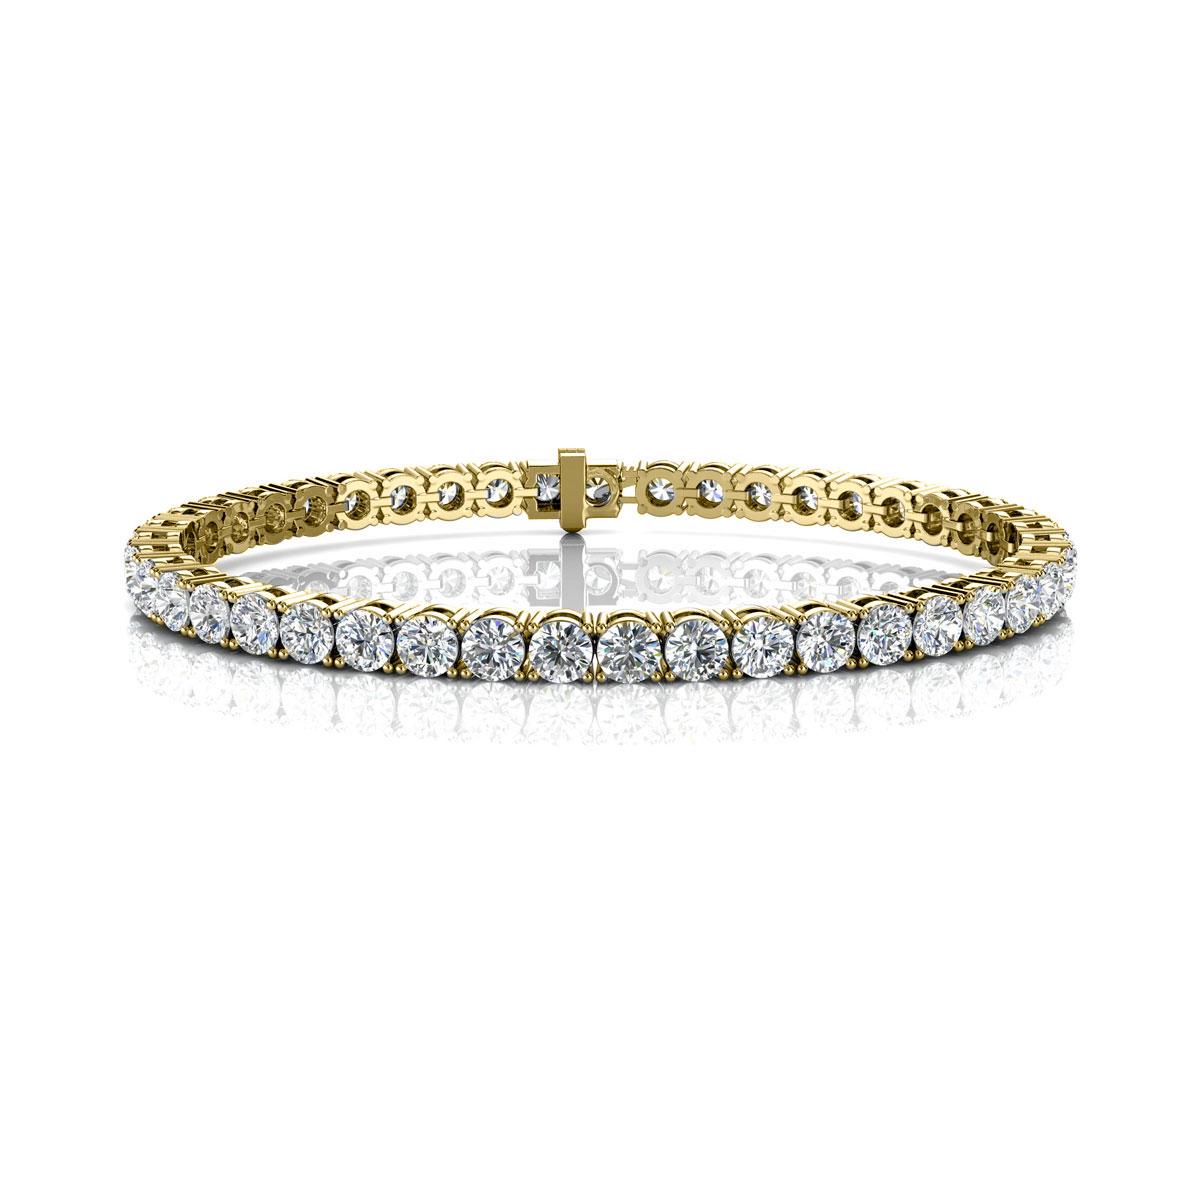 A timeless four prongs diamonds tennis bracelet. Experience the Difference!

Product details: 

Center Gemstone Type: NATURAL DIAMOND
Center Gemstone Color: WHITE
Center Gemstone Shape: ROUND
Center Diamond Carat Weight: 8
Metal: 18K Yellow